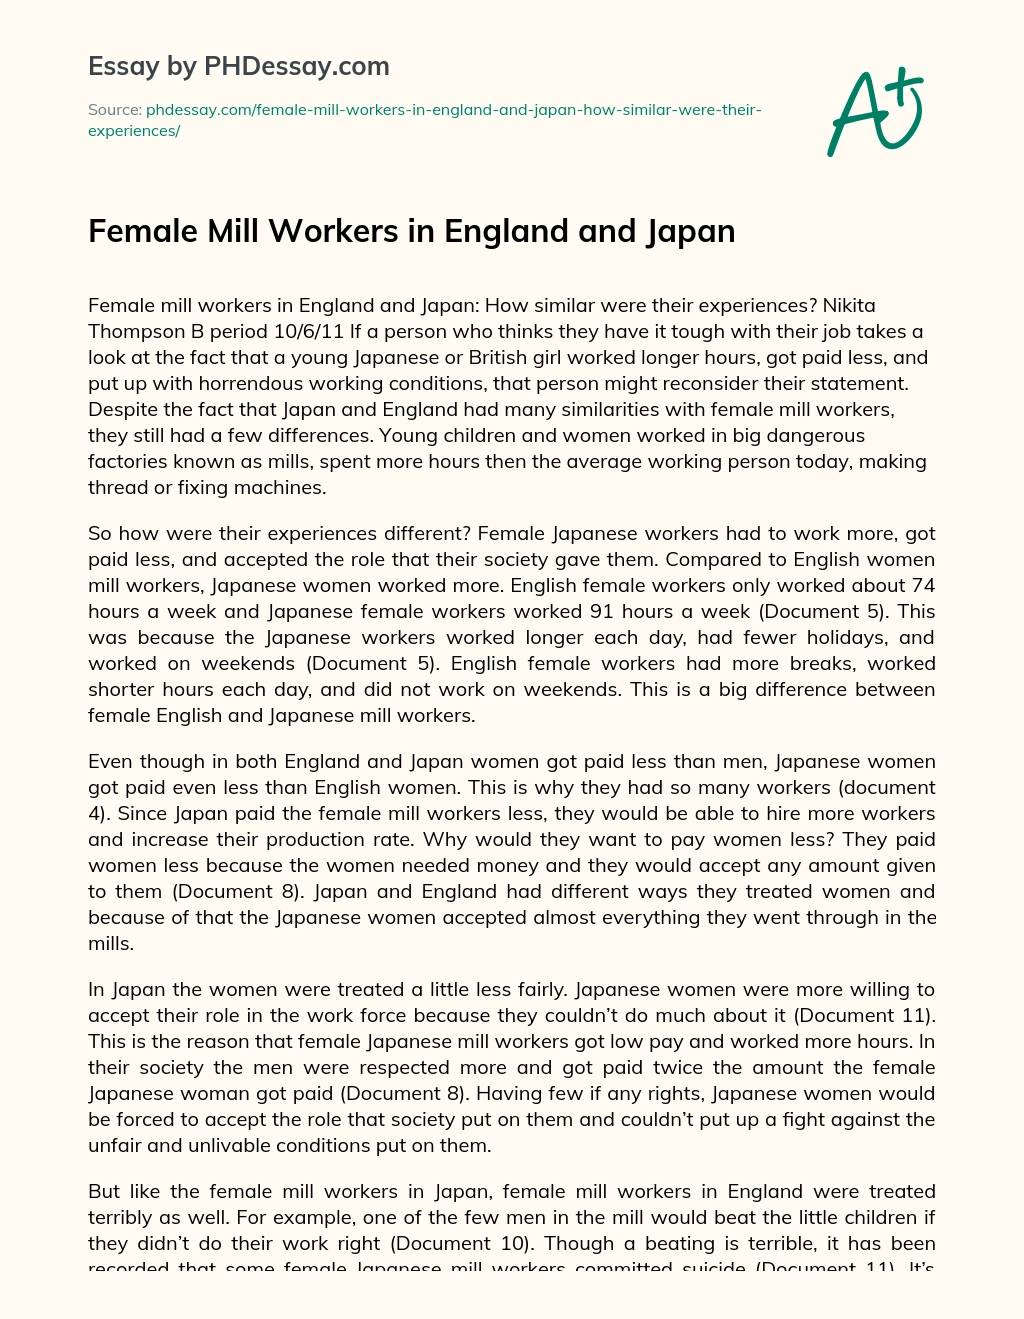 Female Mill Workers in England and Japan essay